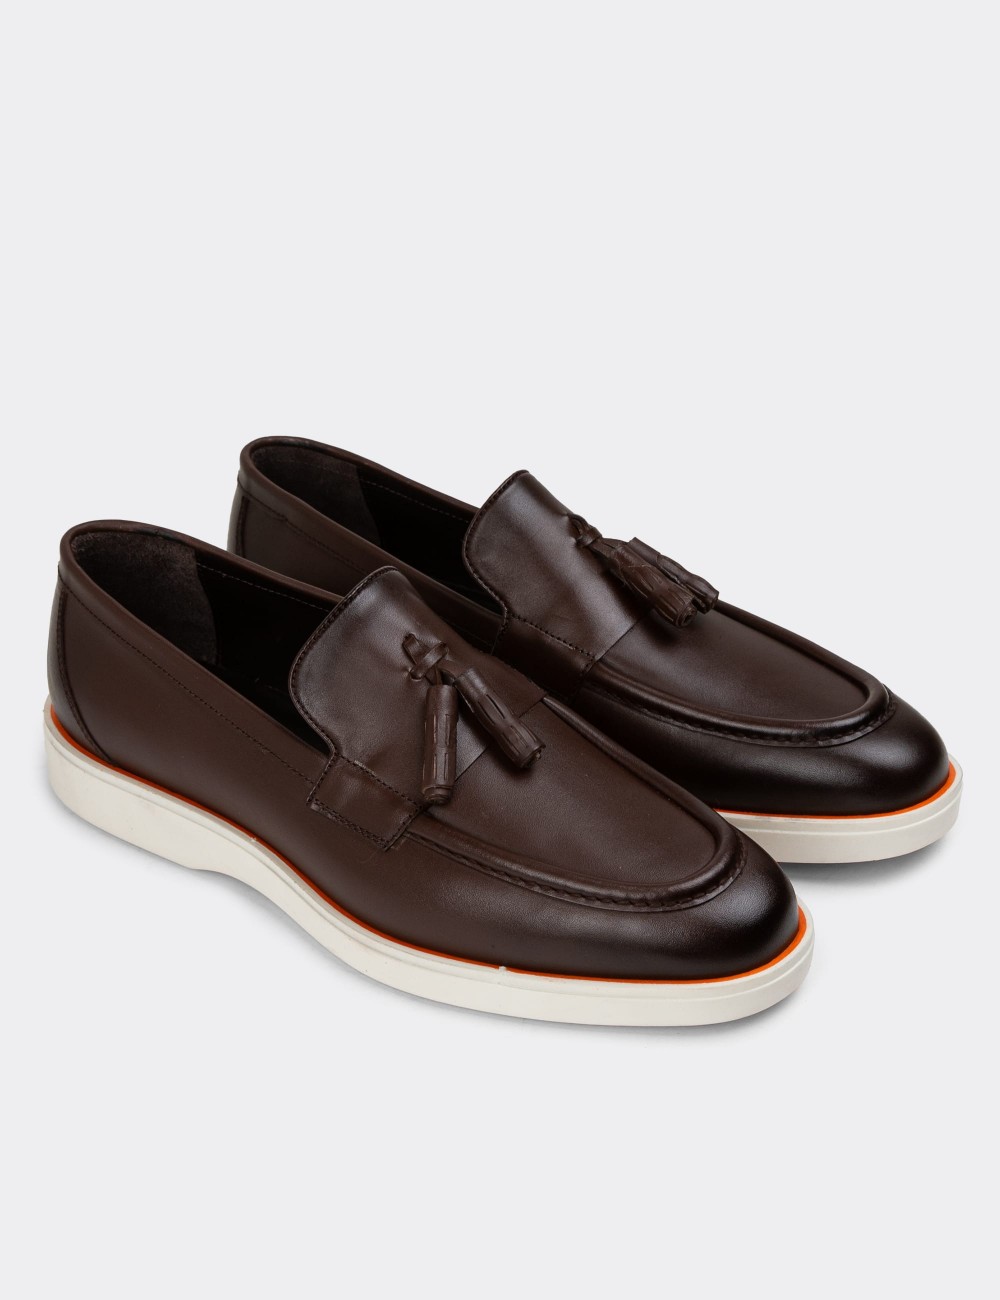 Brown Leather Loafers - 01958MKHVC01